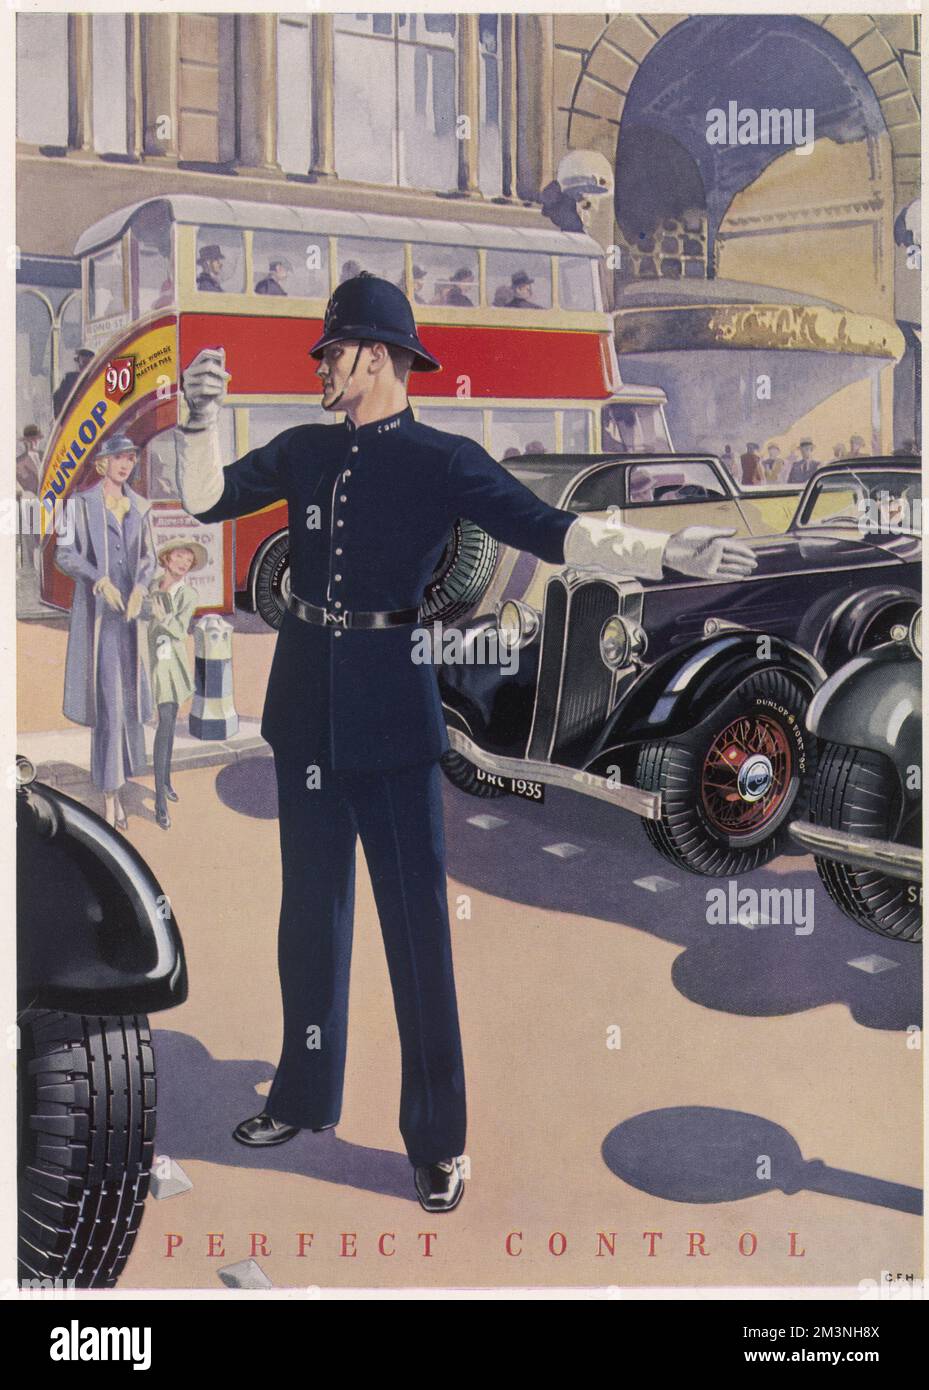 Splendid advert for Dunlop tyres showing a busy London street with a police officer in the road directing traffic and helping pedestrians across the road.     Date: 1935 Stock Photo